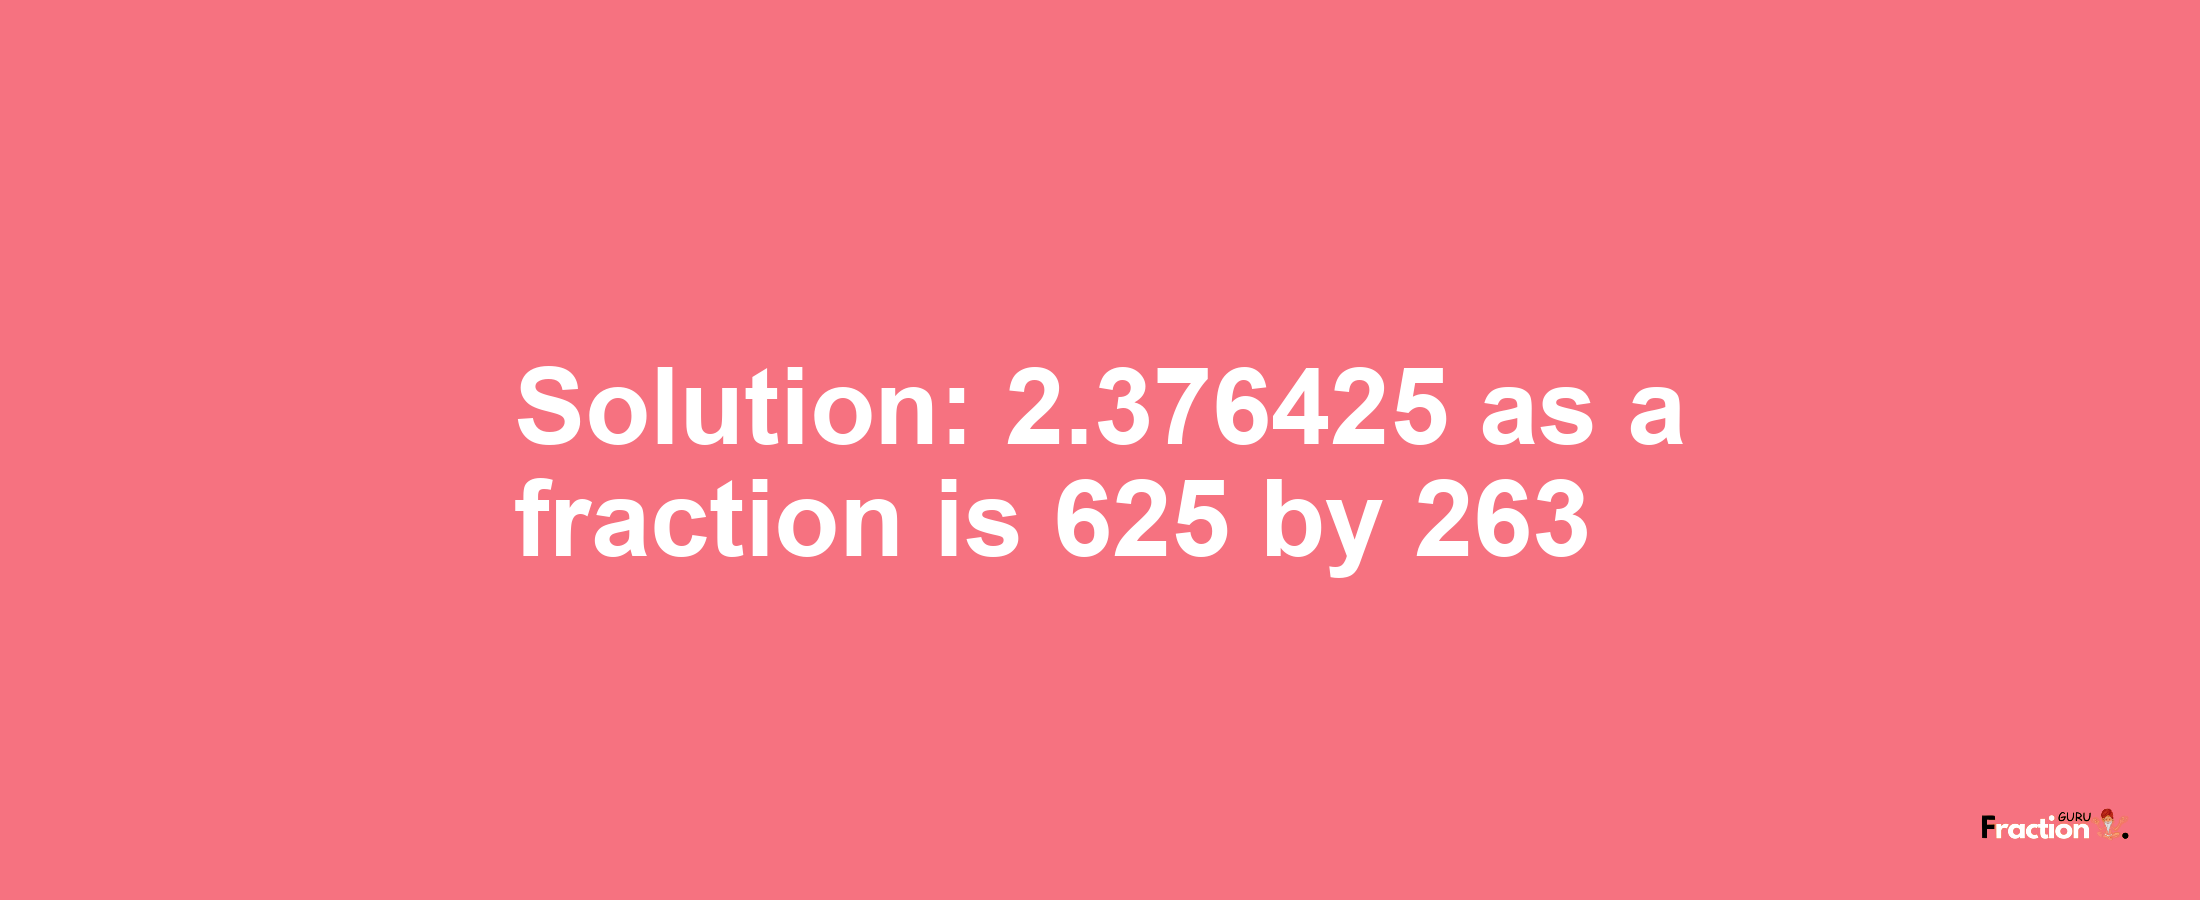 Solution:2.376425 as a fraction is 625/263